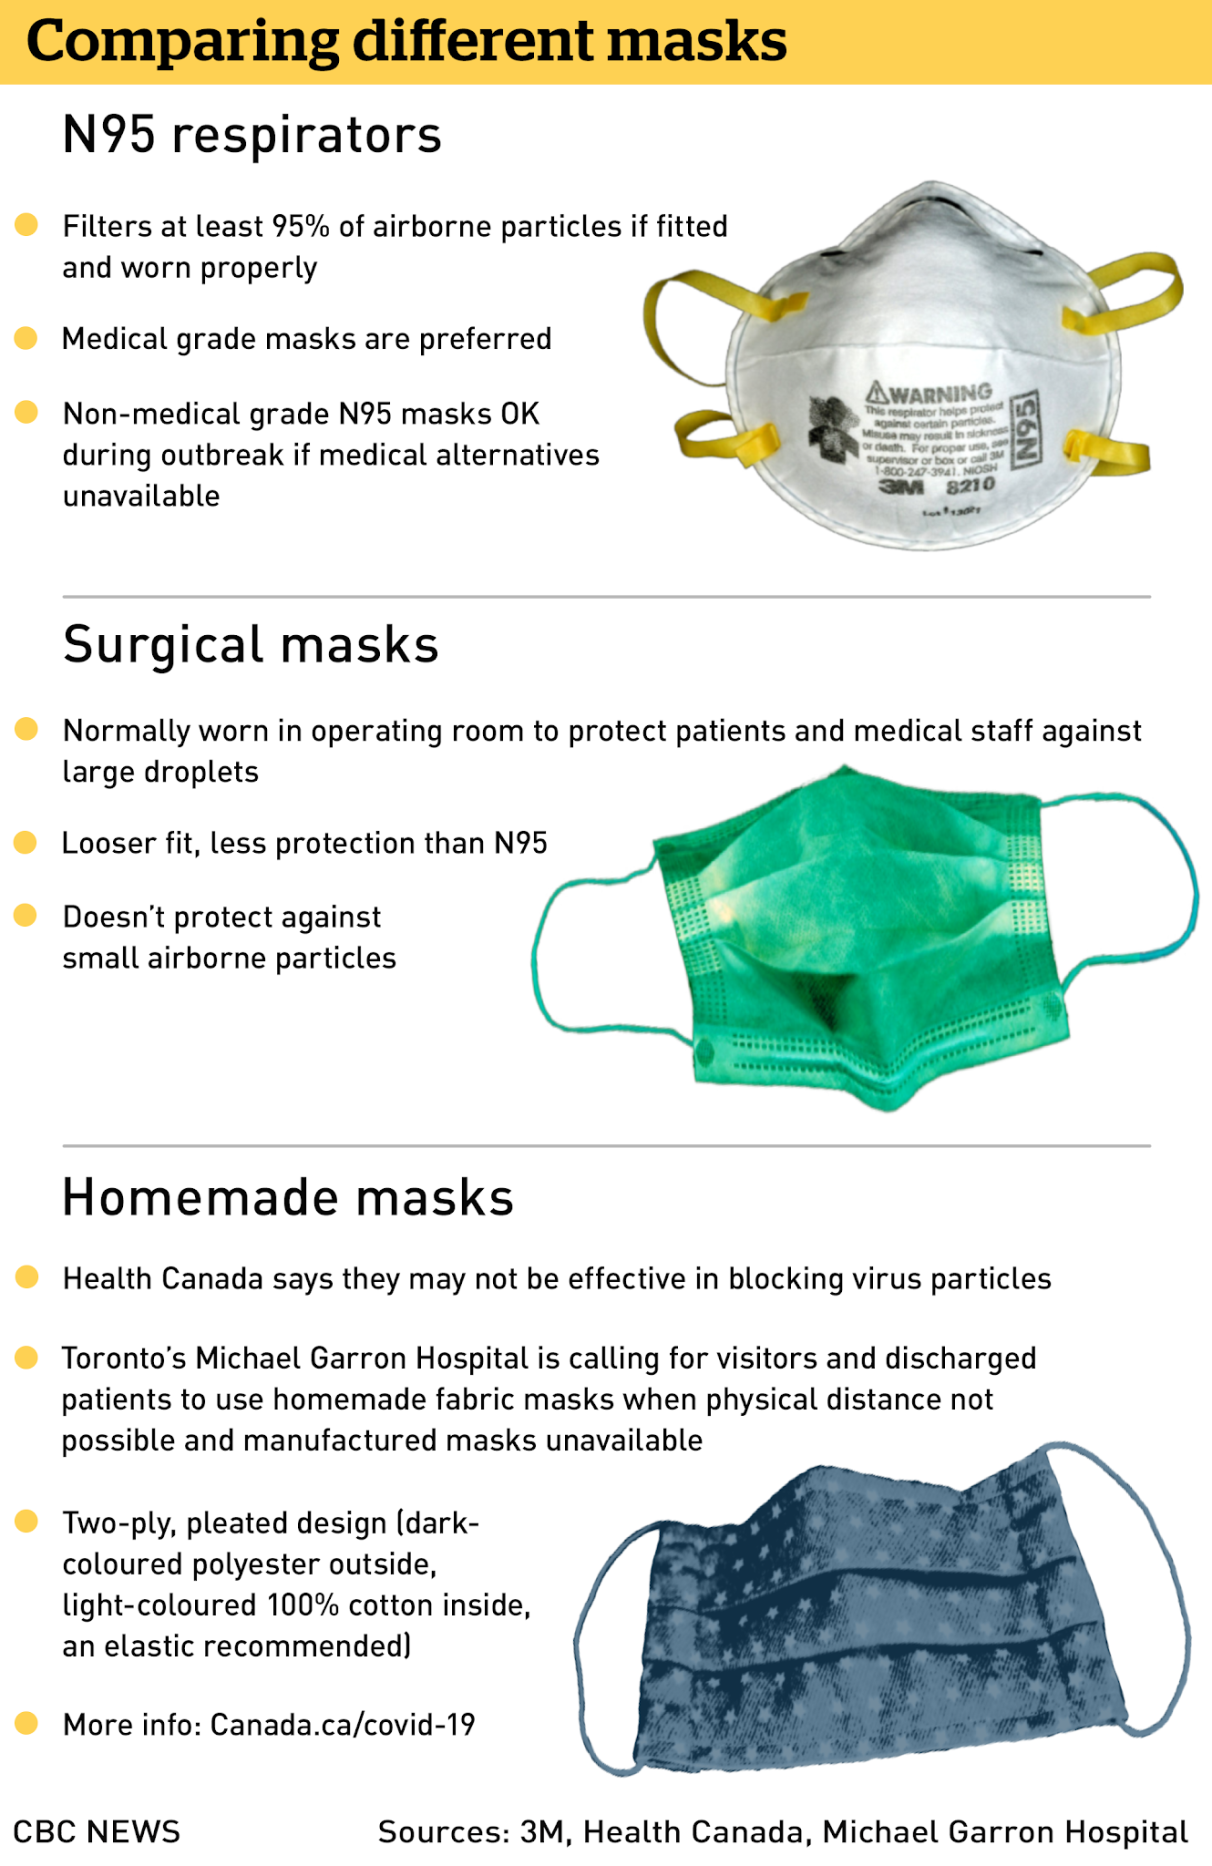 Protective Masks - What You Should Know